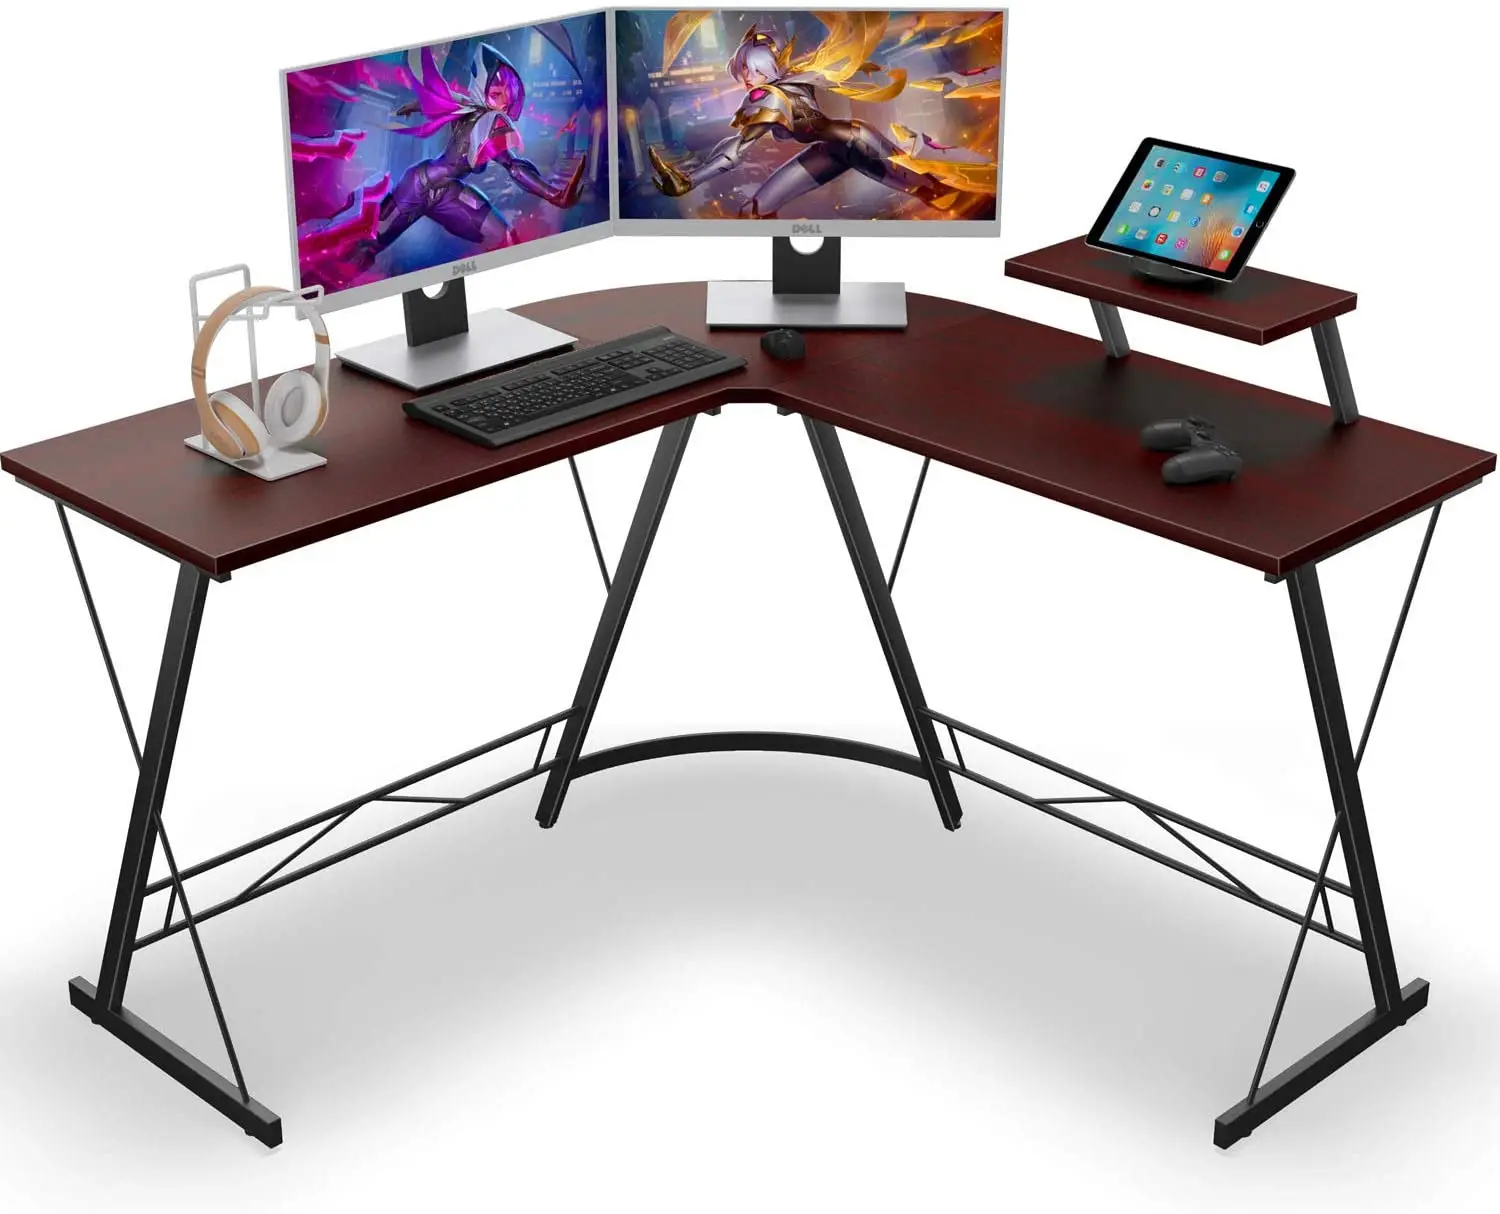 New L Shaped Desk Corner Computer Laptop Study Table black white Workstation for 2 persons Working Studying Gaming Desk